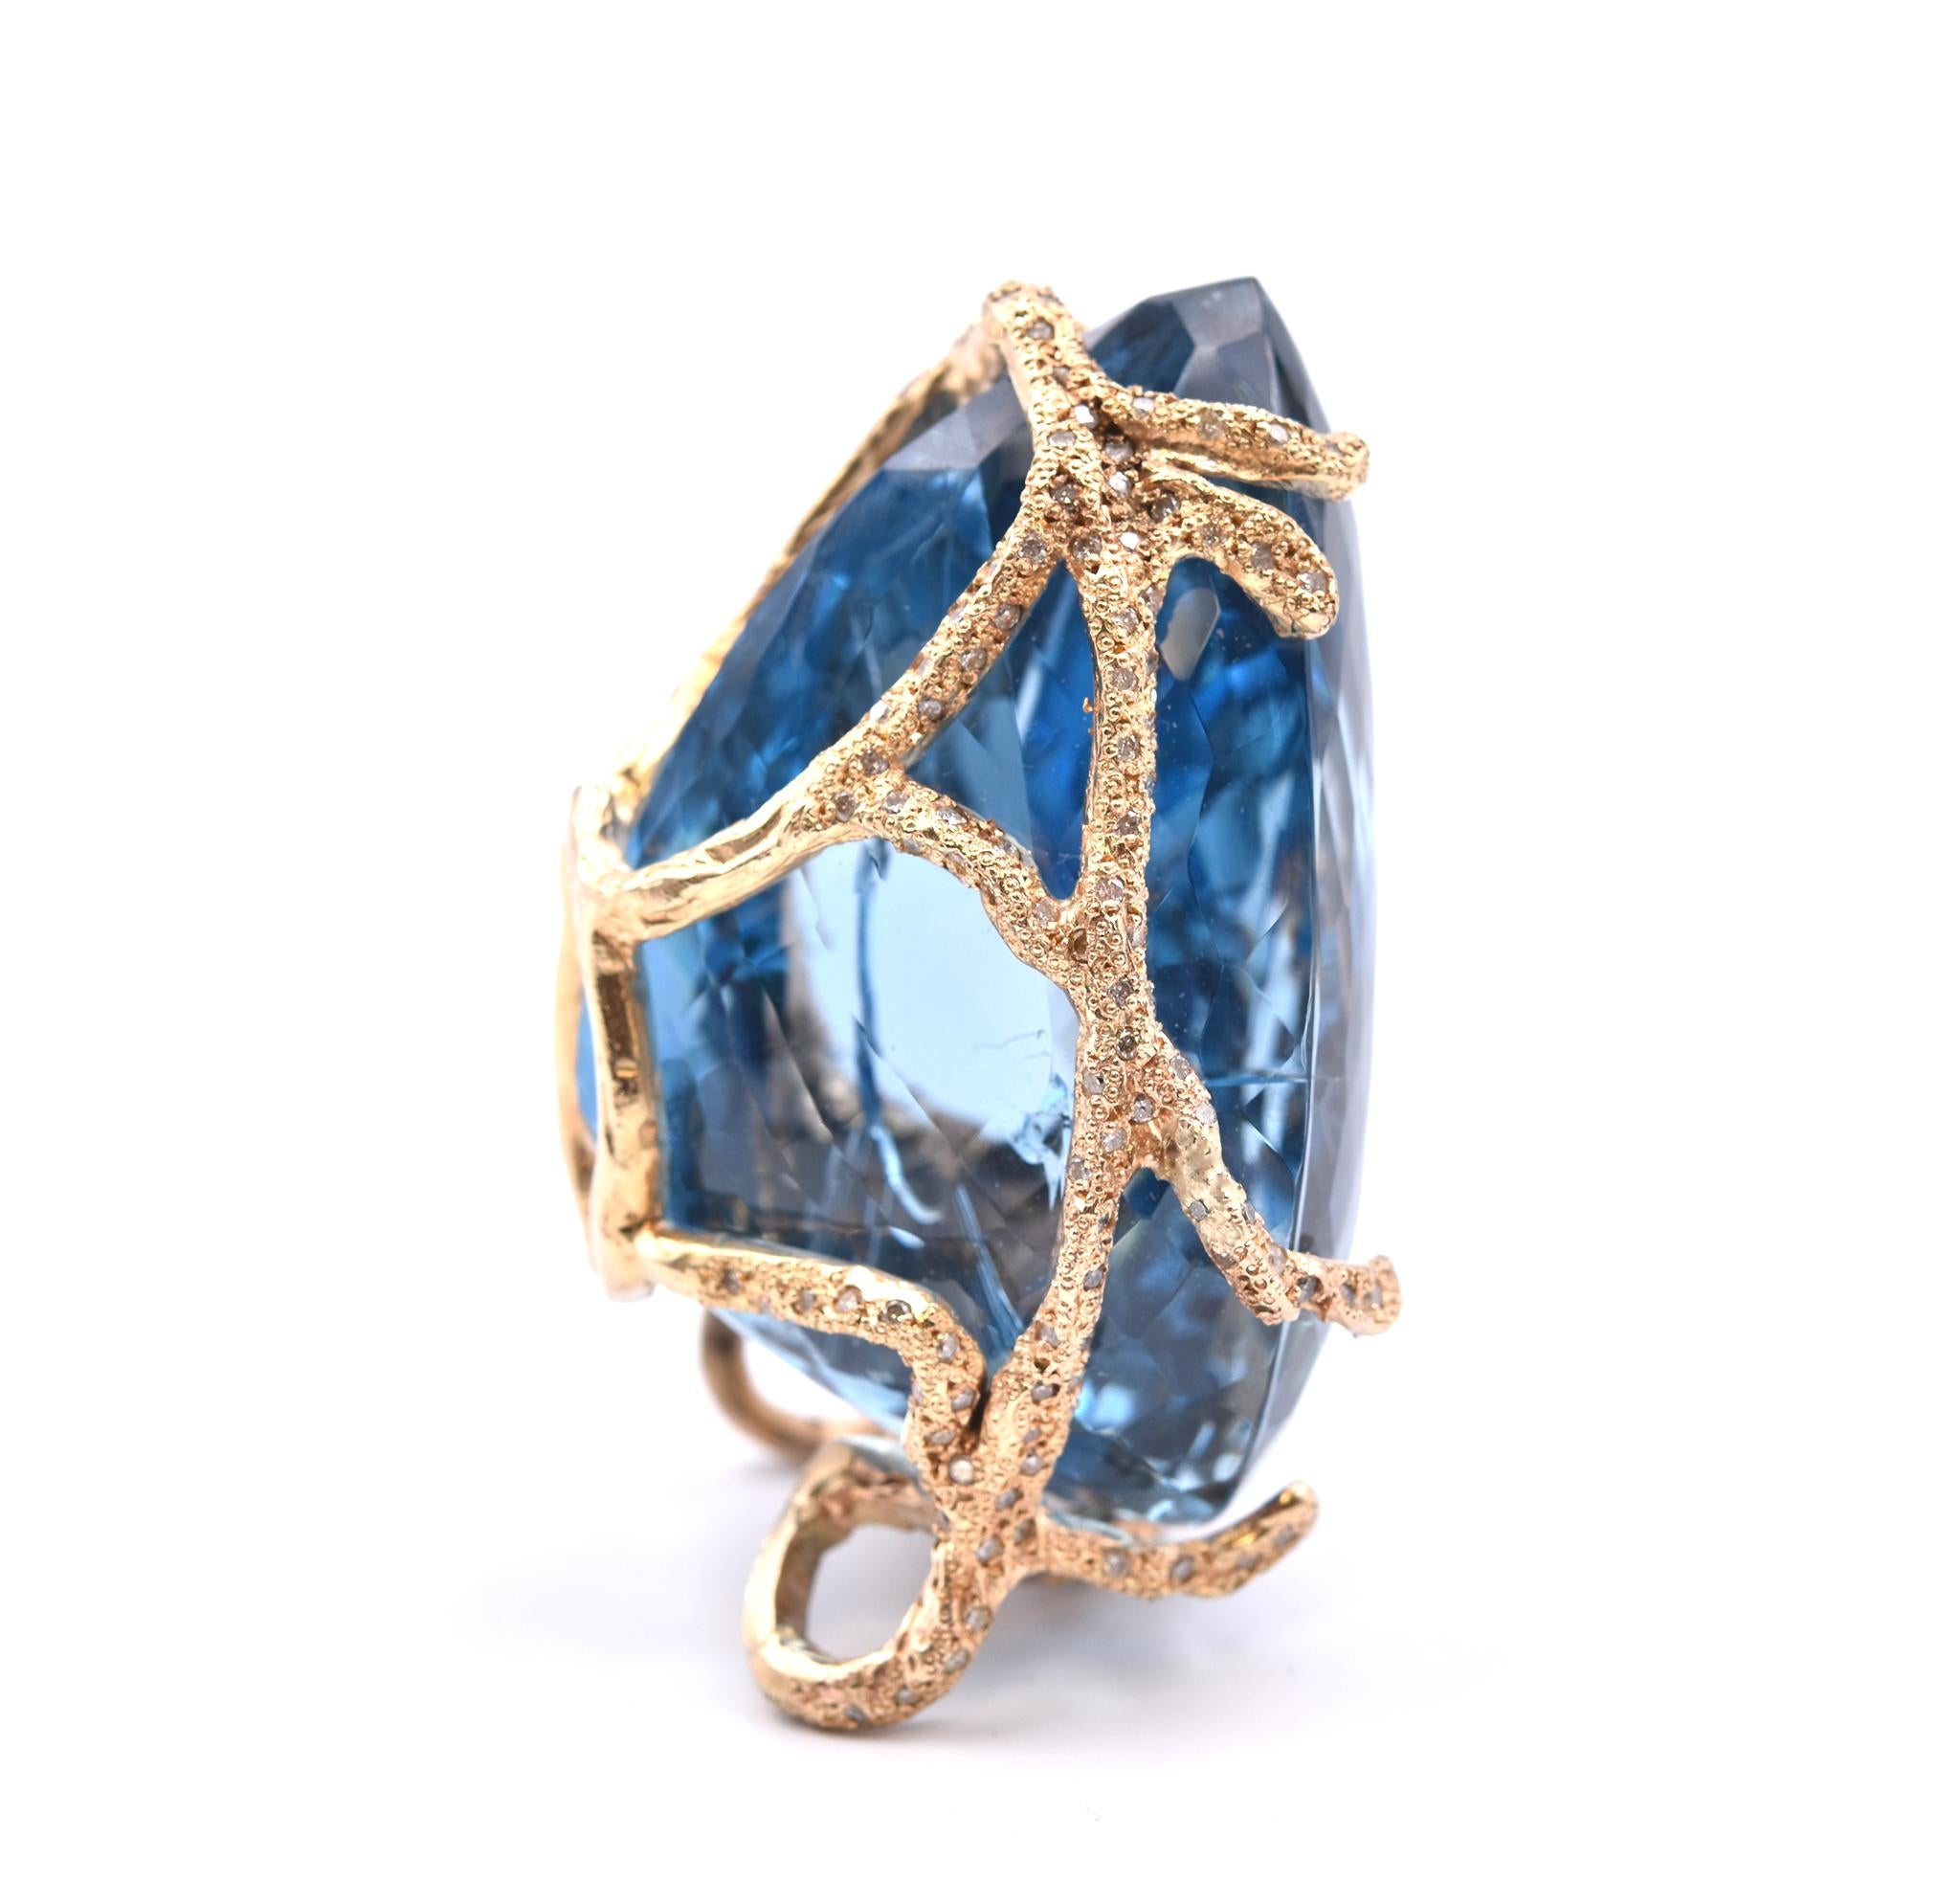 Material: 14k yellow gold
Gemstone: pear cut blue topaz = 426 carats
Diamonds: 225 round brilliant cuts = 3.40cttw
Color: H-J
Clarity: SI
Dimensions: Pendant measures 64.25mm x 50mm
Weight: 162.75 grams
